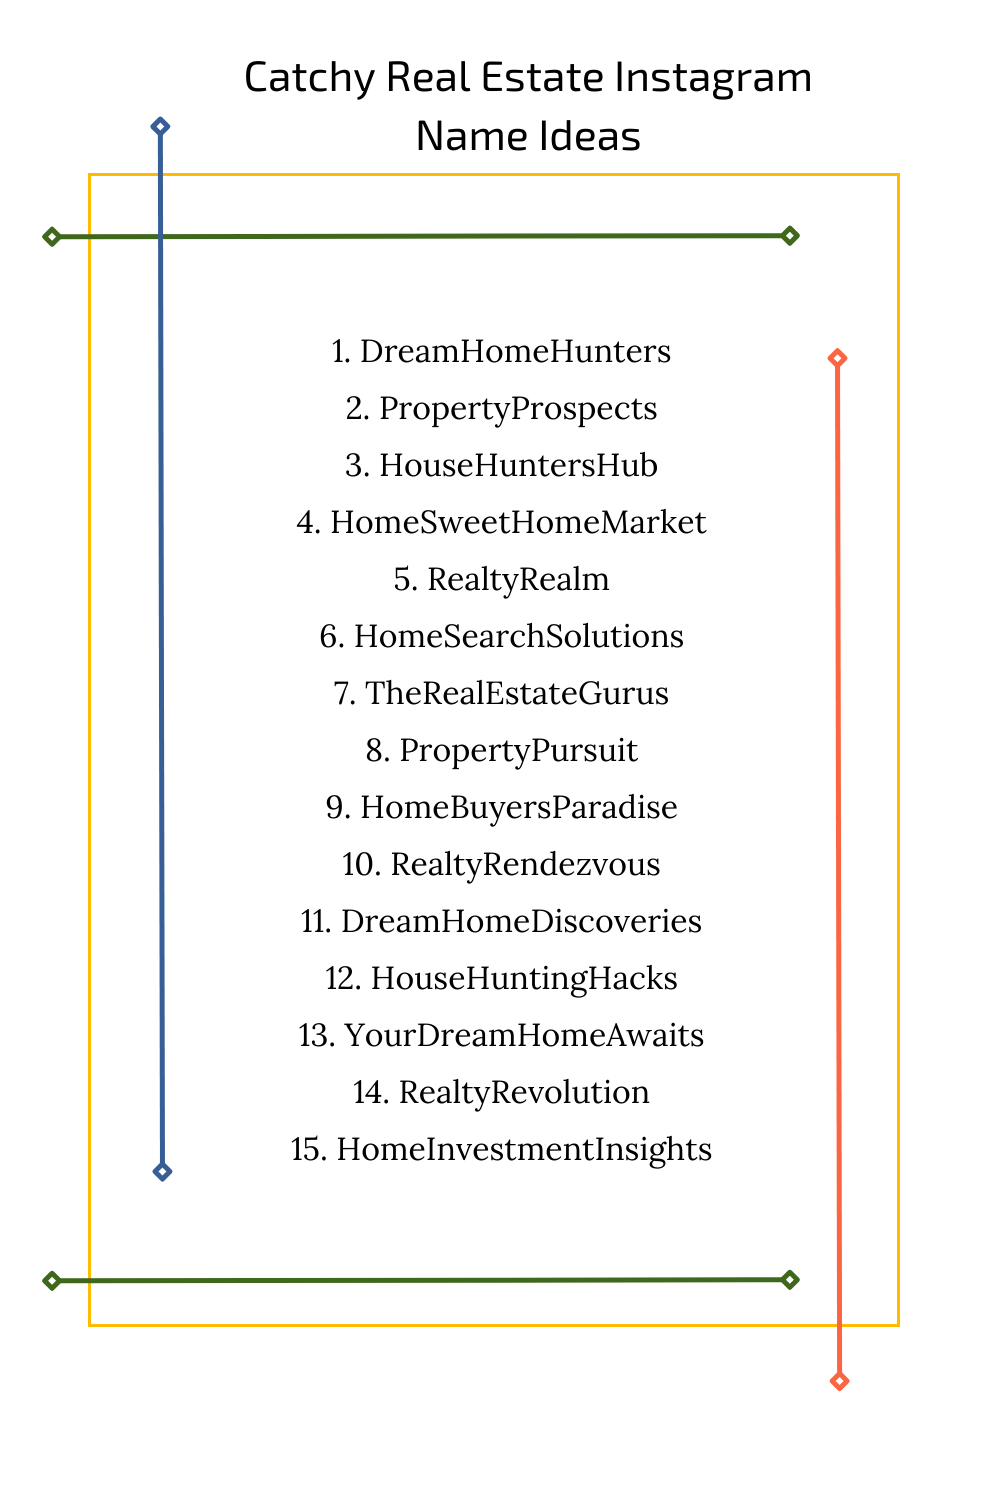 Catchy Real Estate Instagram Name Ideas